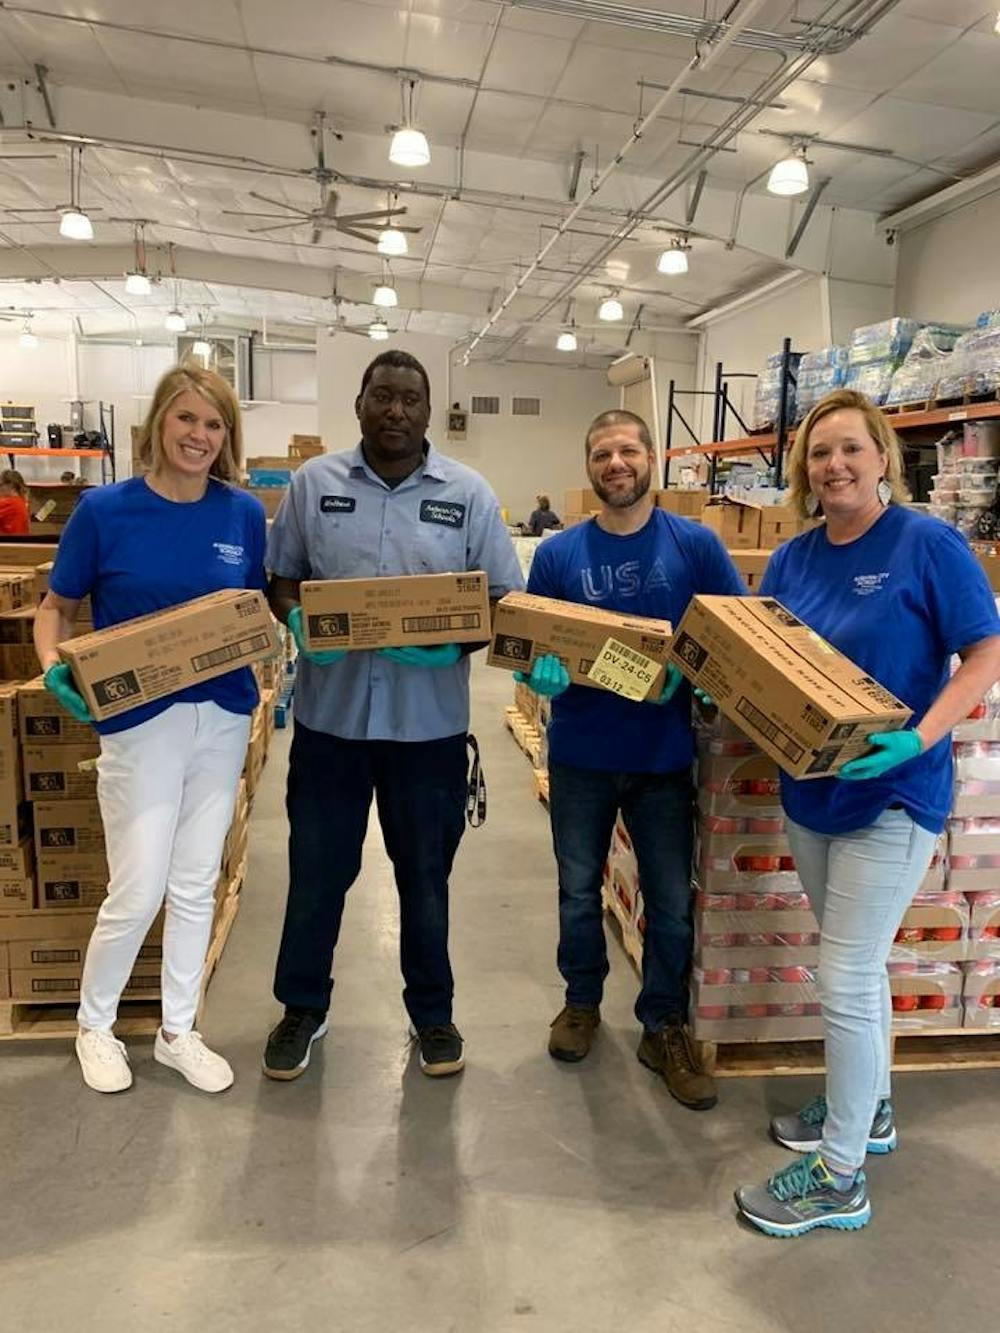 Auburn City Schools has partnered with the Dream Center to provide meal boxes to families in need after schools were closed state-wide in an effort to prevent the spread of the COVID-19 virus. 